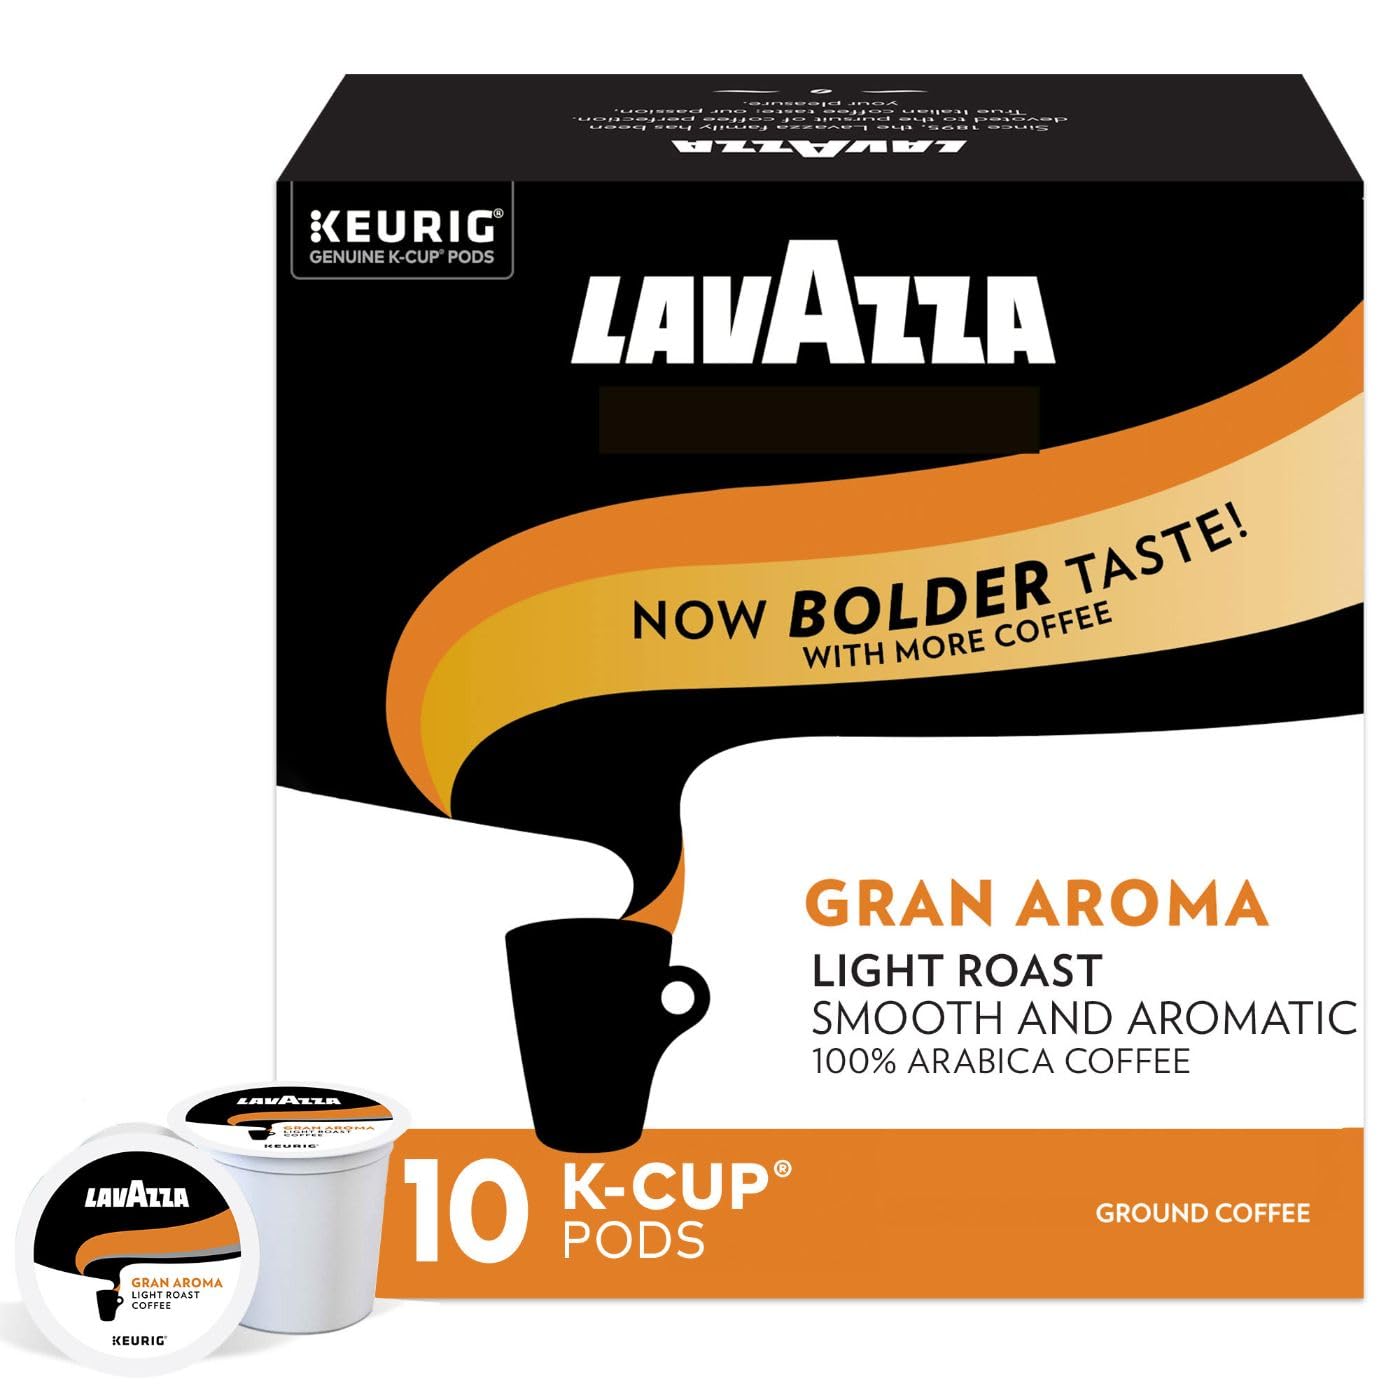 Lavazza Gran Aroma Single-Serve Coffee K-Cup® Pods for Keurig Brewer, Light Roast, 10-Count Boxes (Pack of 6)